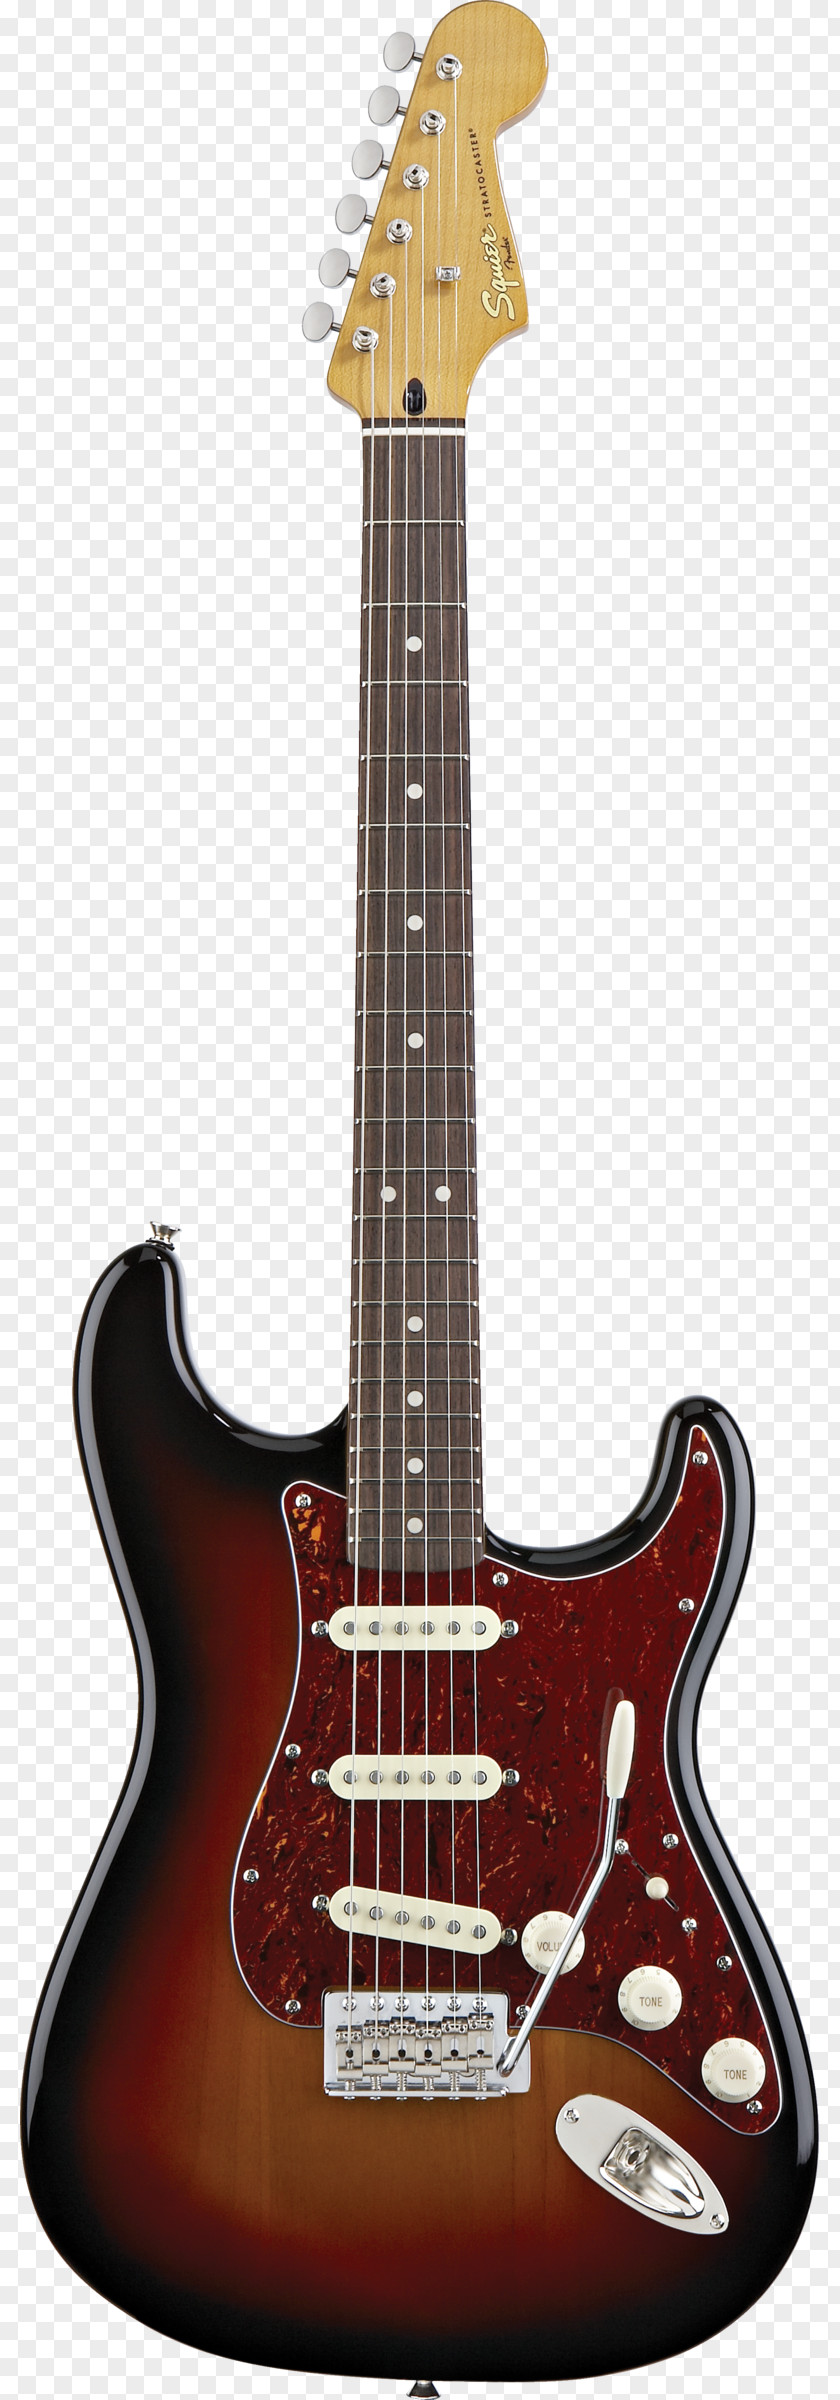 Electric Guitar Squier Deluxe Hot Rails Stratocaster Fender Musical Instruments Corporation PNG